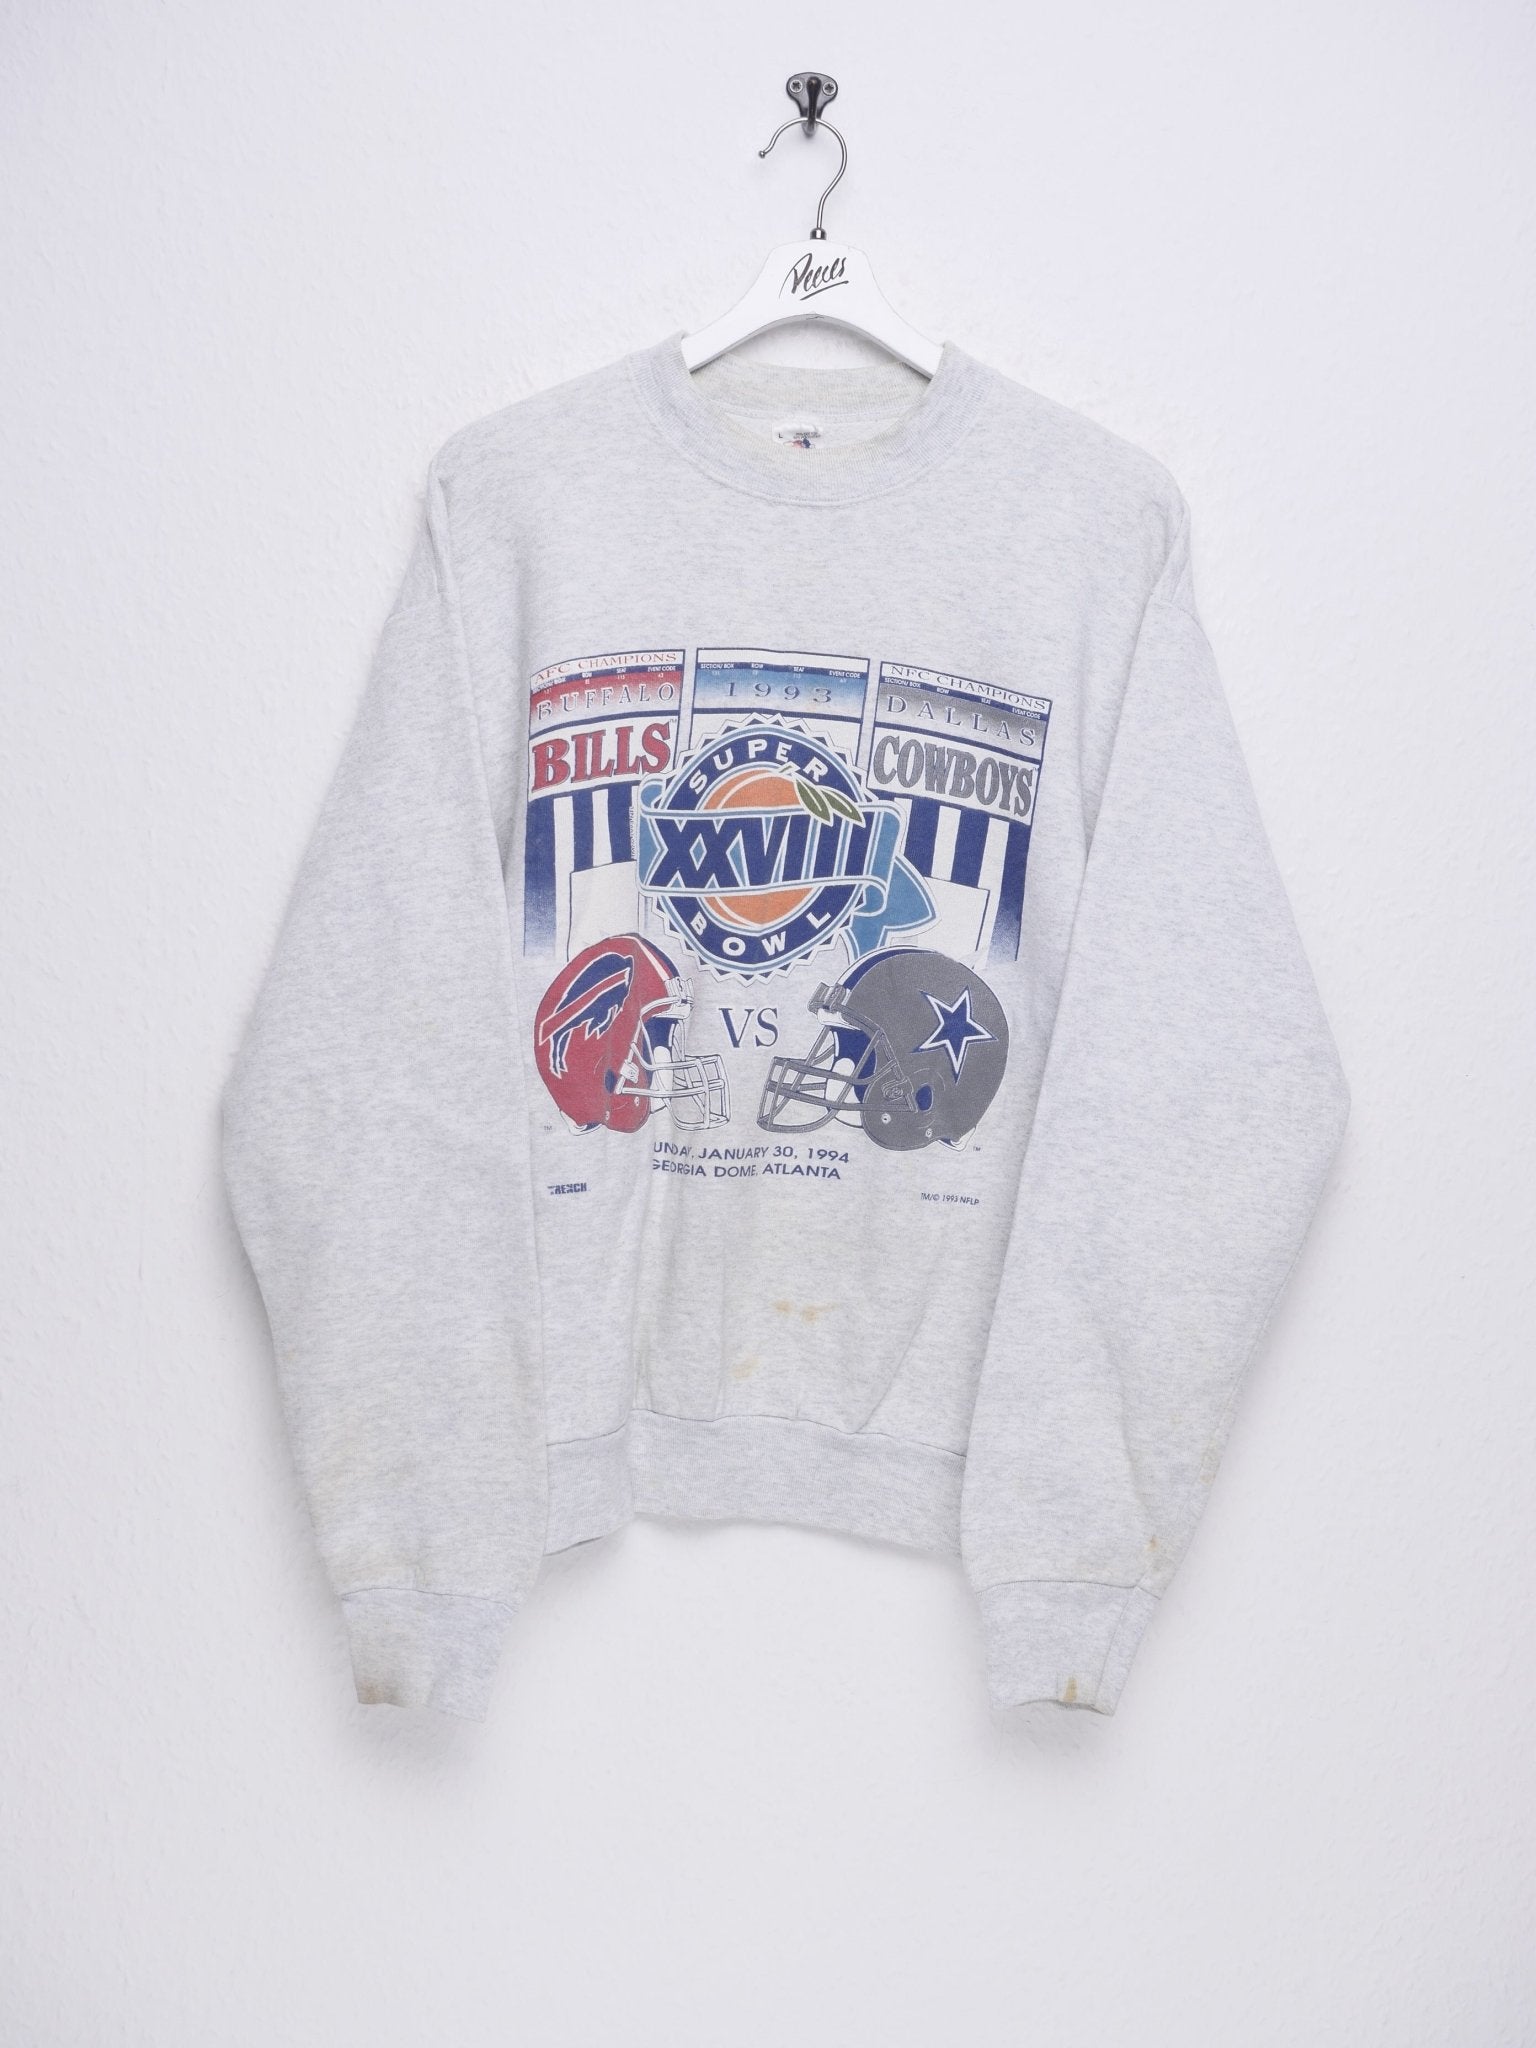 Super Bowl 1994 printed Graphic Vintage Sweater - Peeces